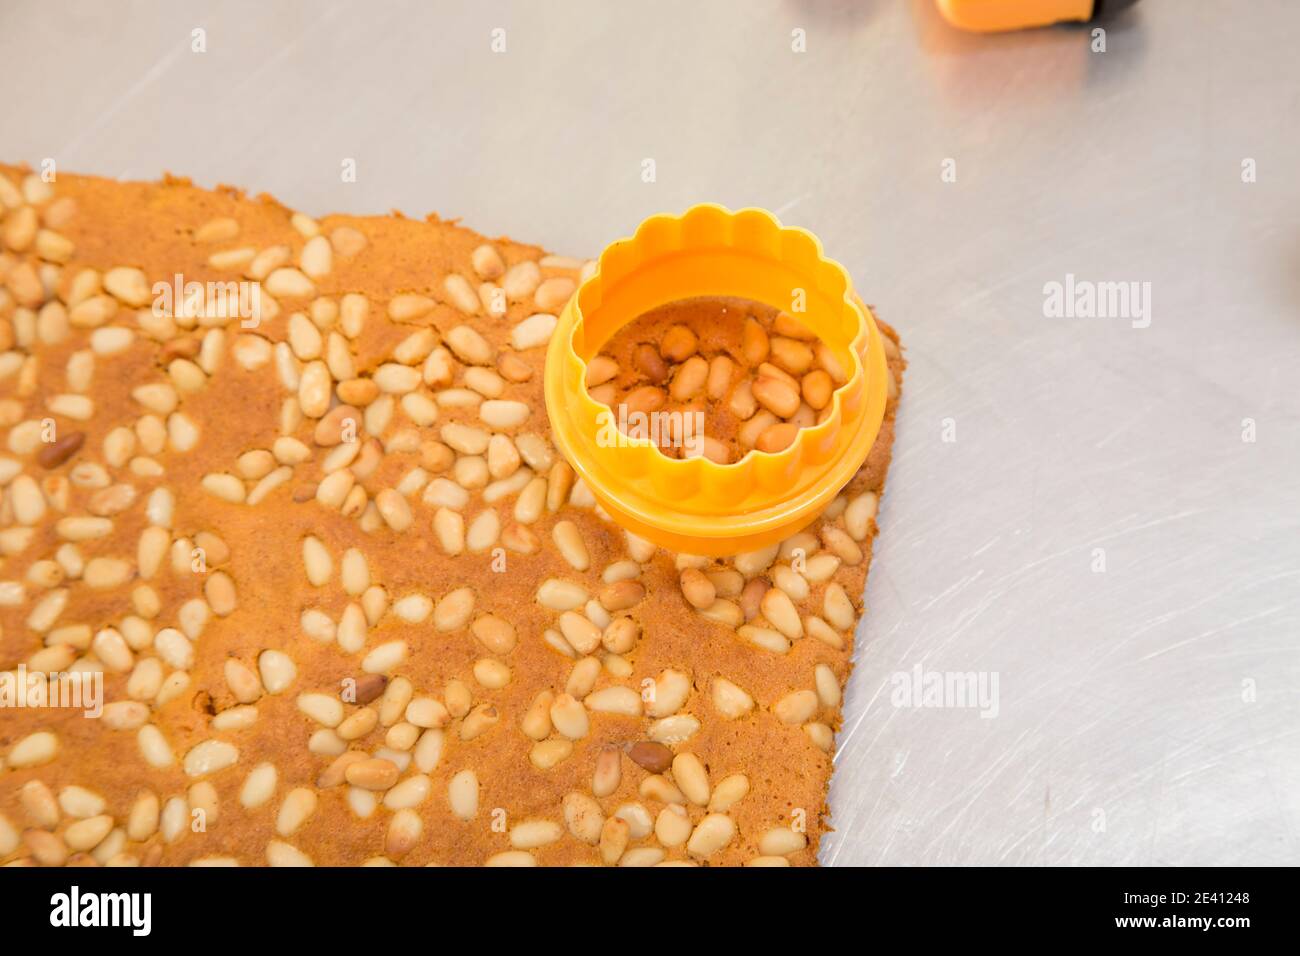 Ready carrot sponge cake with pine nuts. It is located on a metal surface. Close-up. Stock Photo